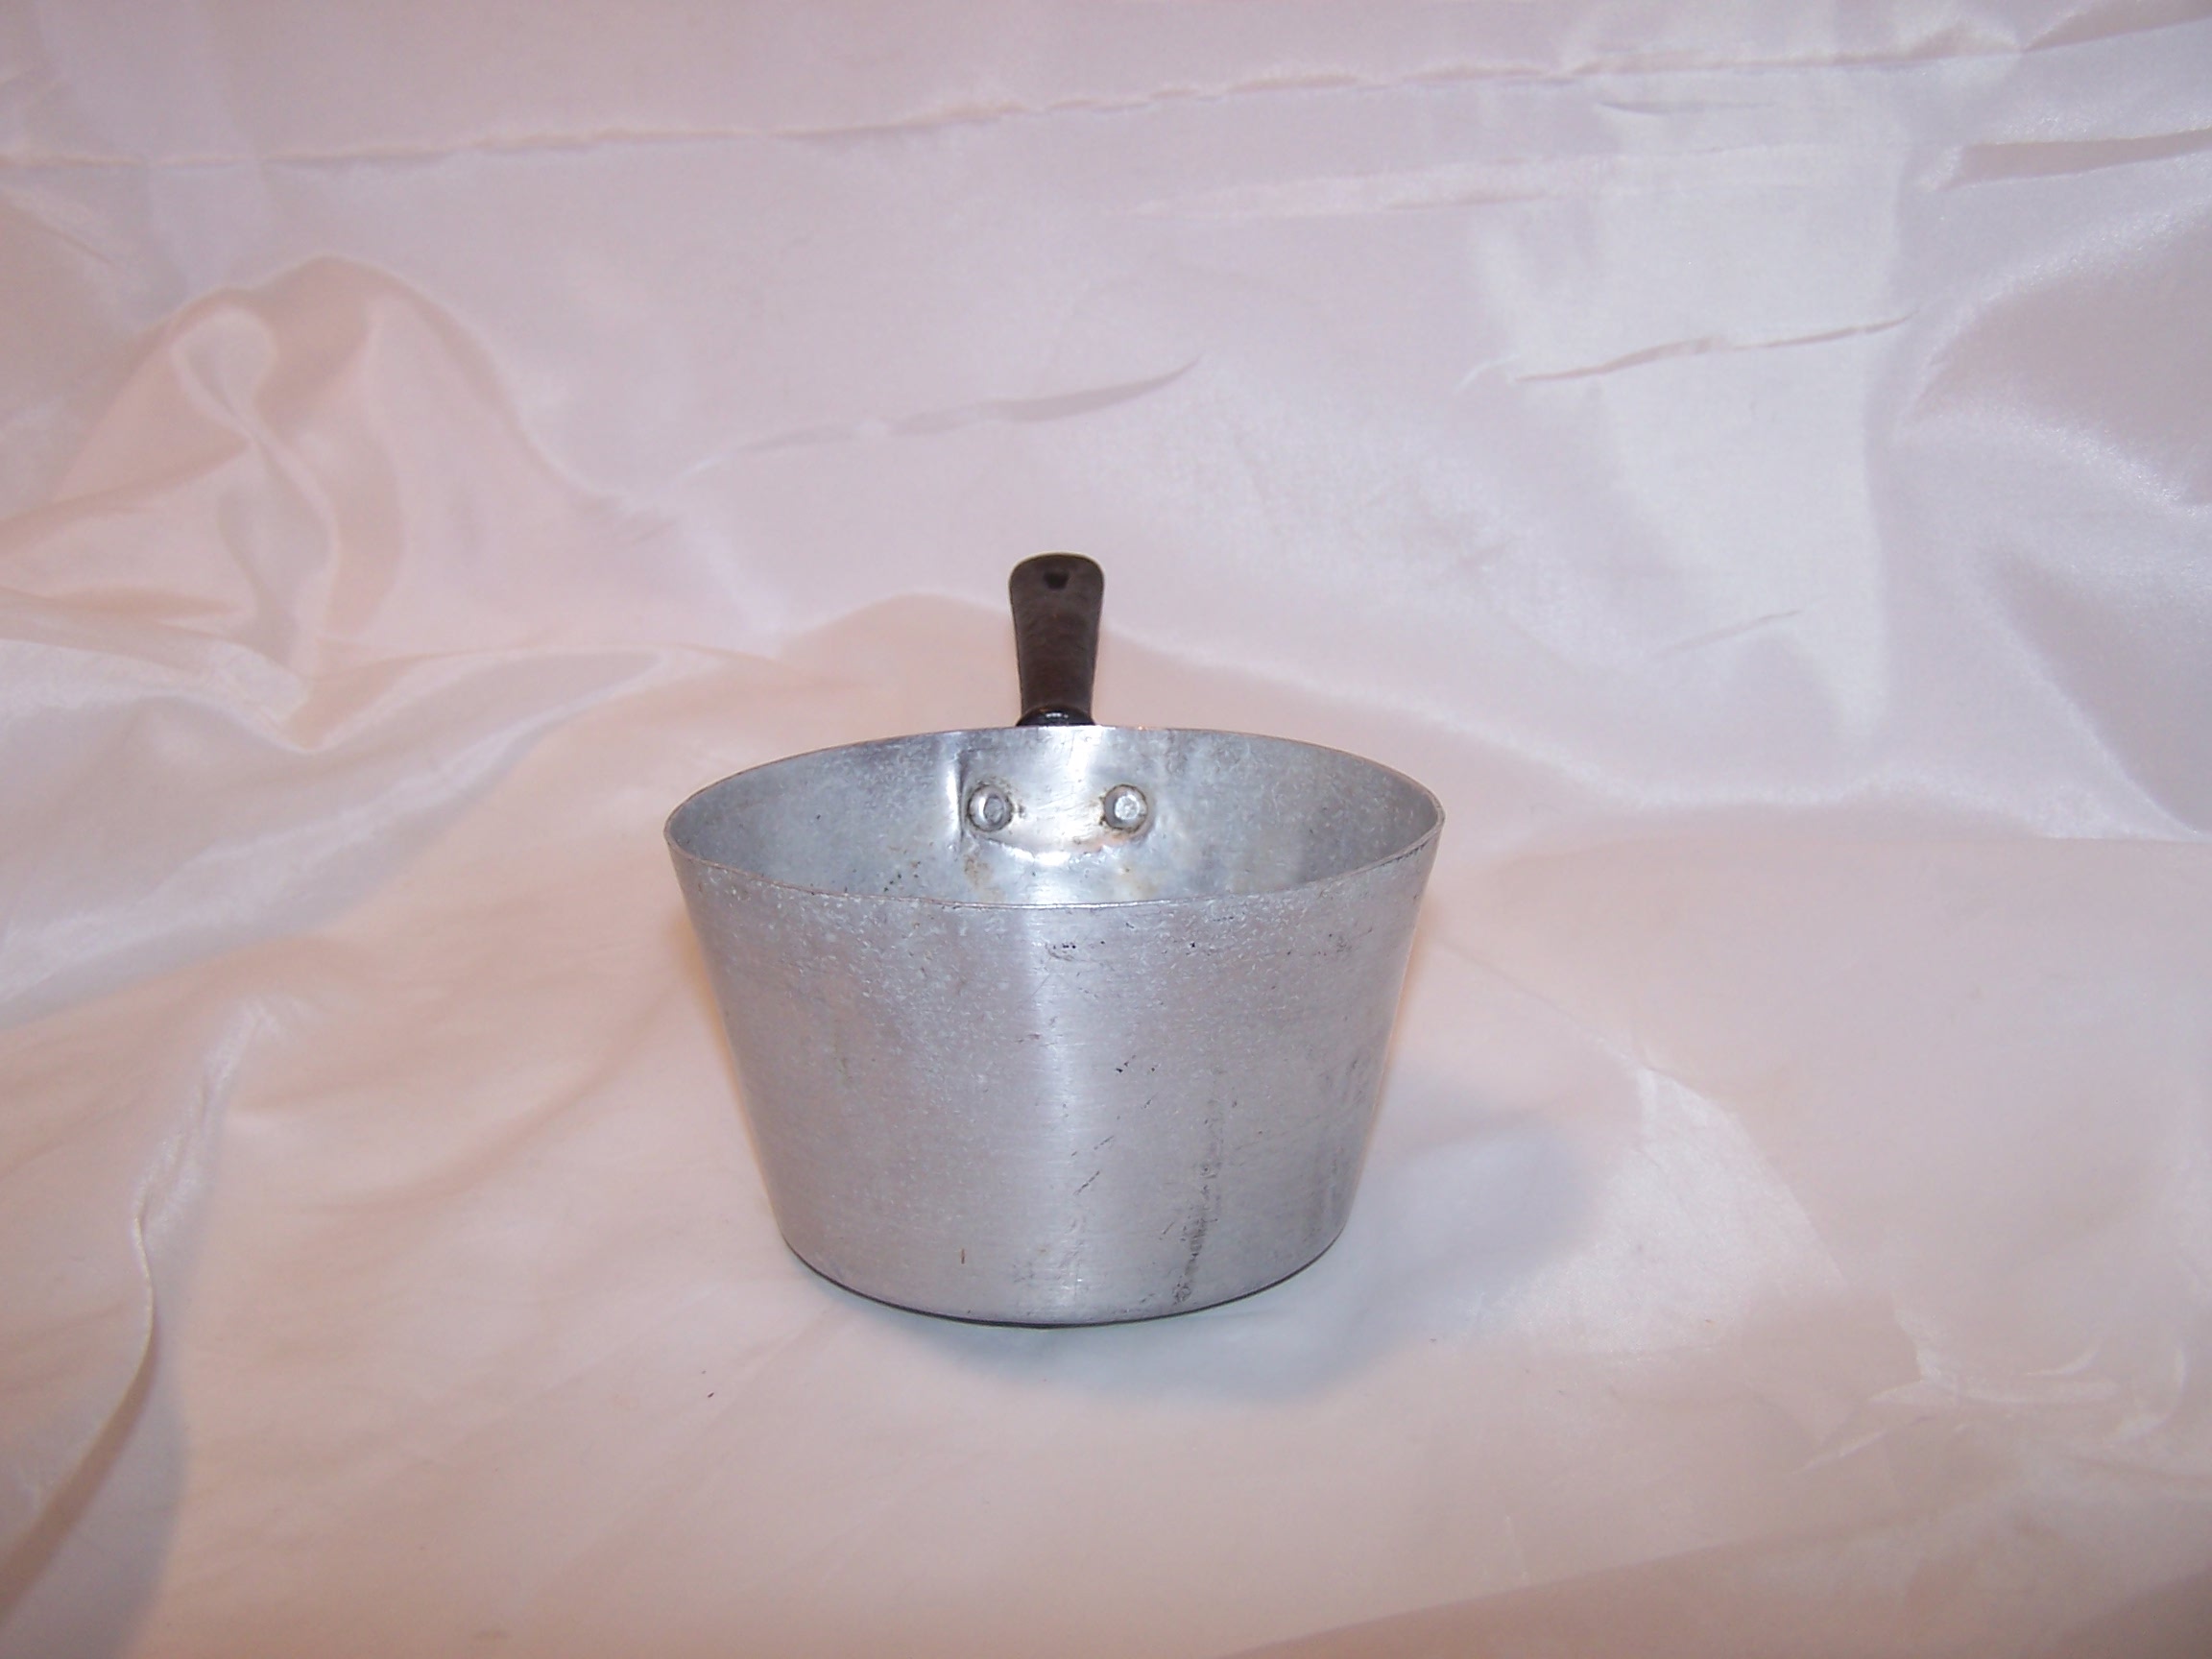 Image 3 of Toy Cook Pot, Aluminum, Vintage Childs Toy